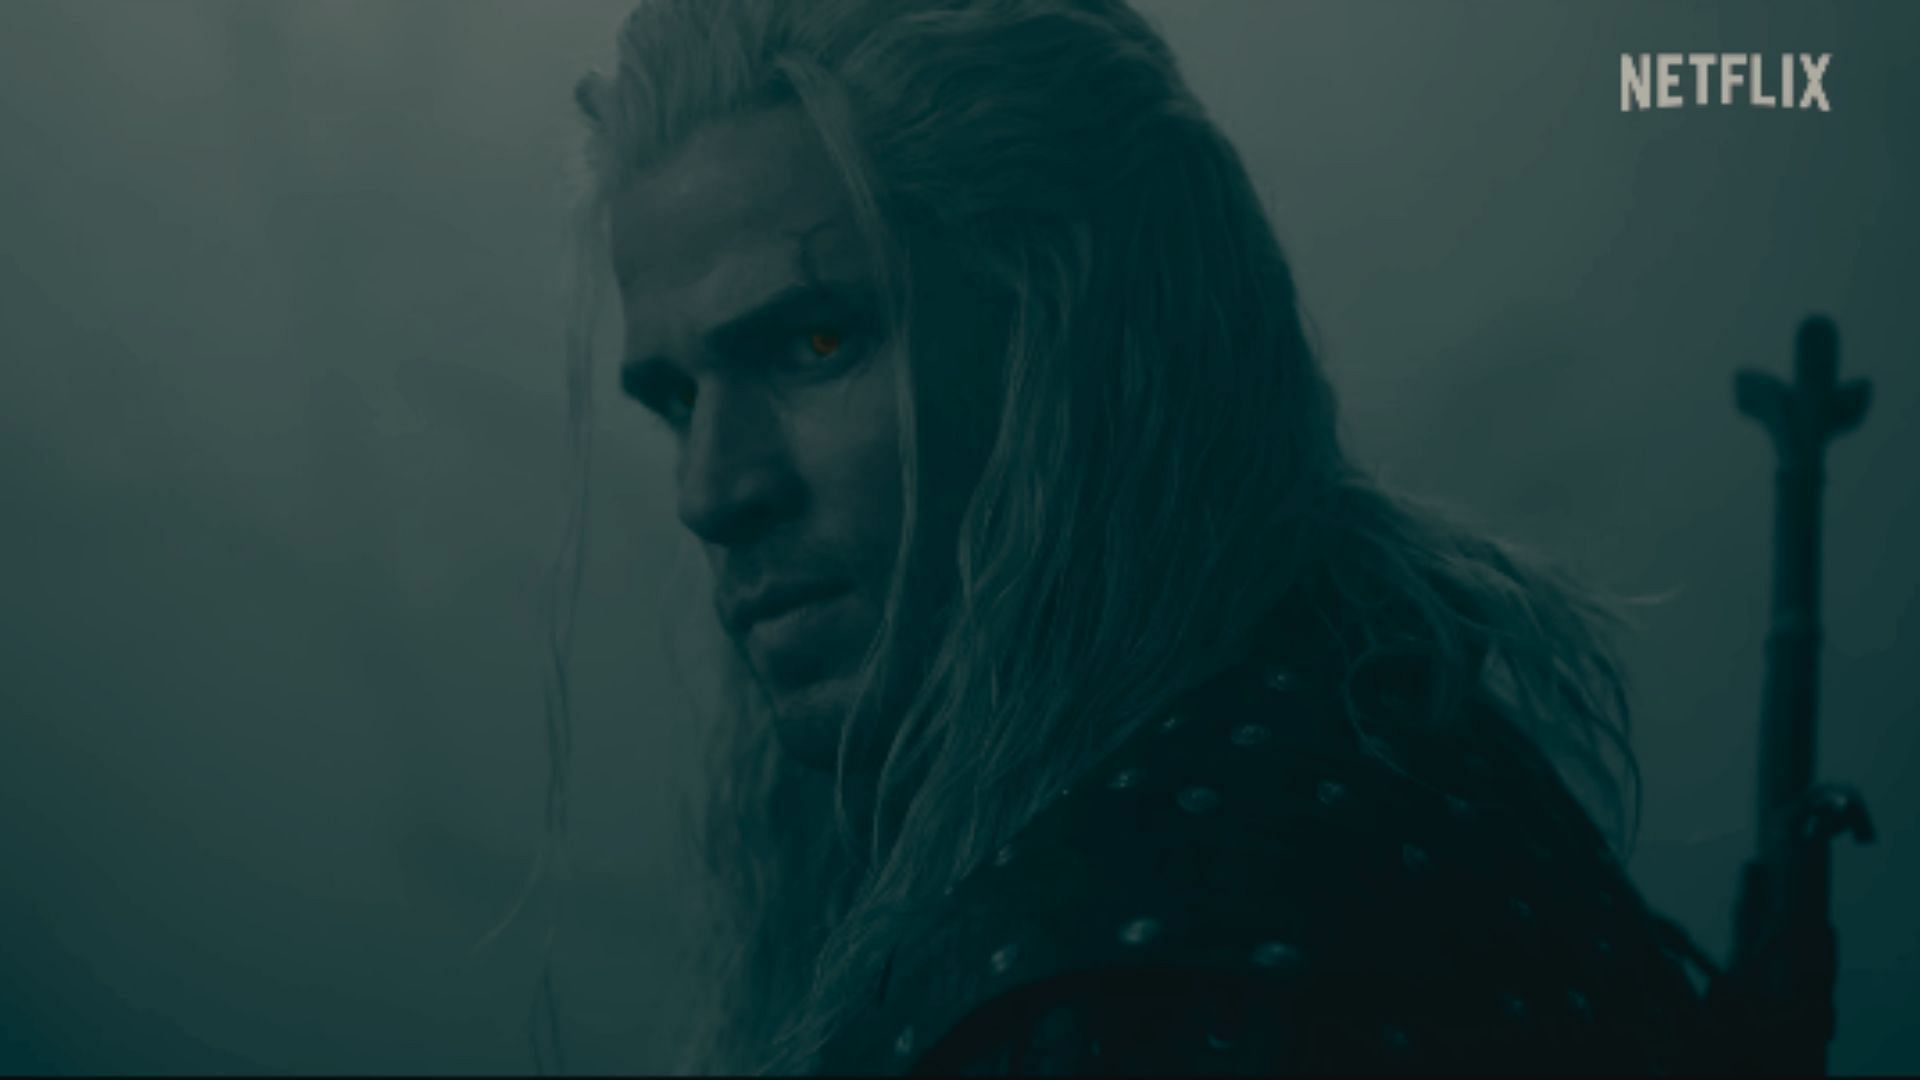 Liam Hemsworth is The witcher aka Geralt of Rivia replacing henry cavil 